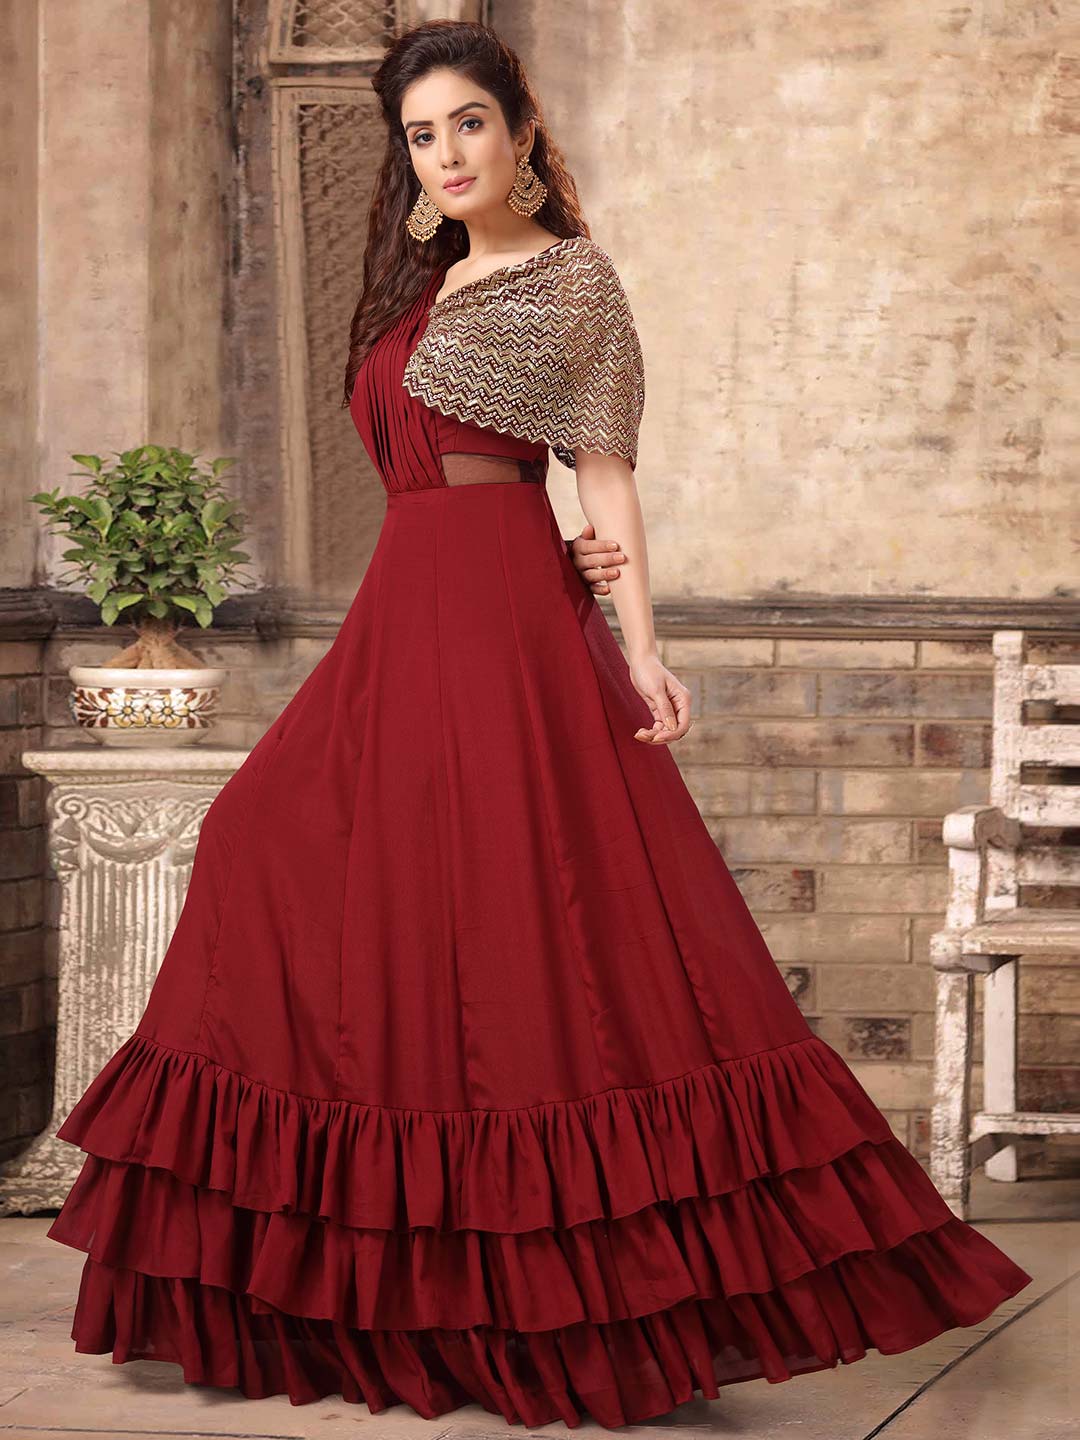 Women Gowns 2020 Buy Indo Western Gowns Wedding